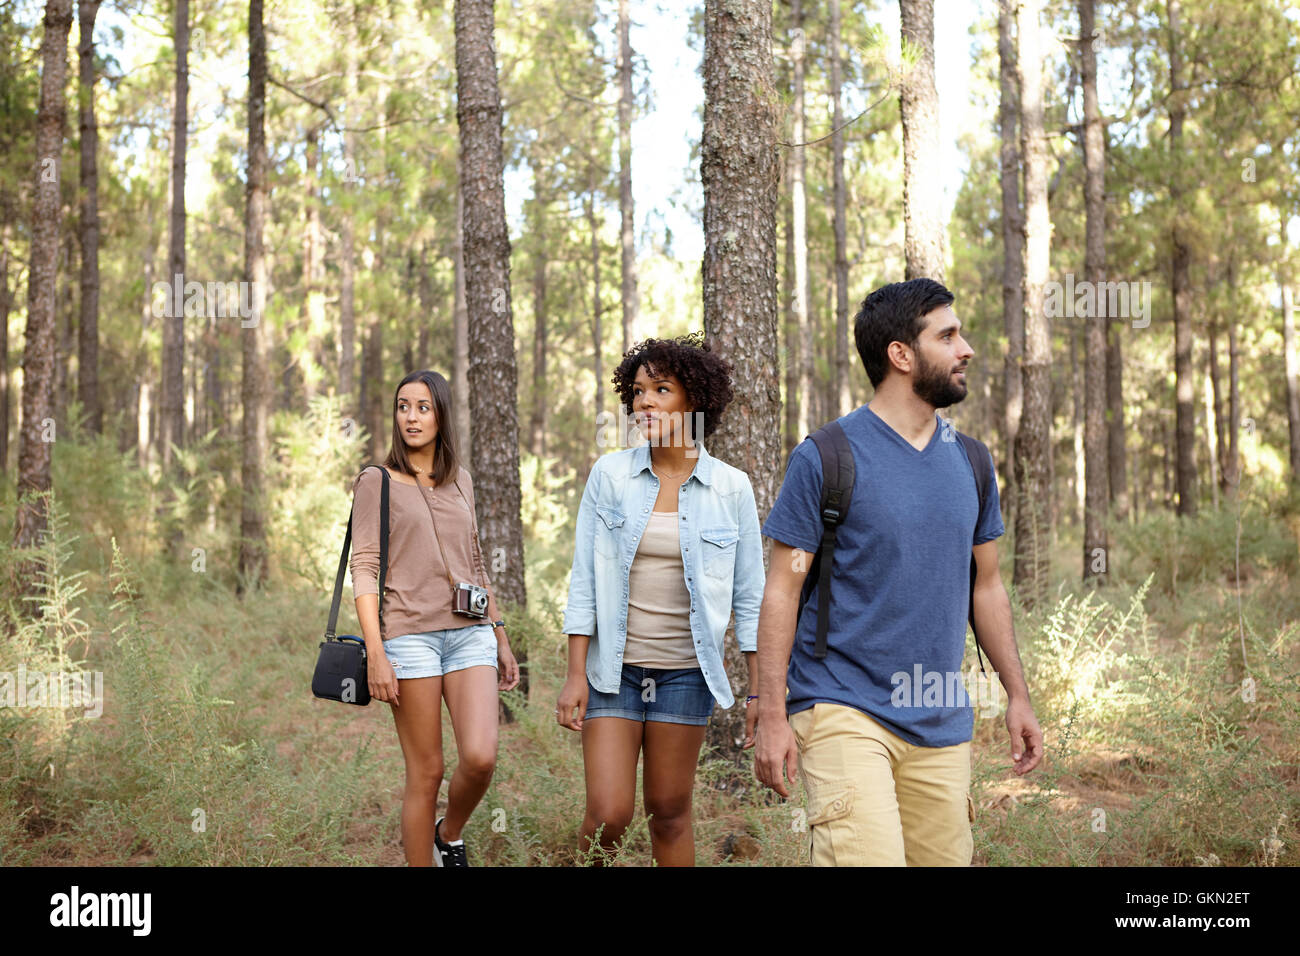 Three friends strolling leisurely through a pine tree forest in the late afternoon sunshine while wearing casual clothing Stock Photo